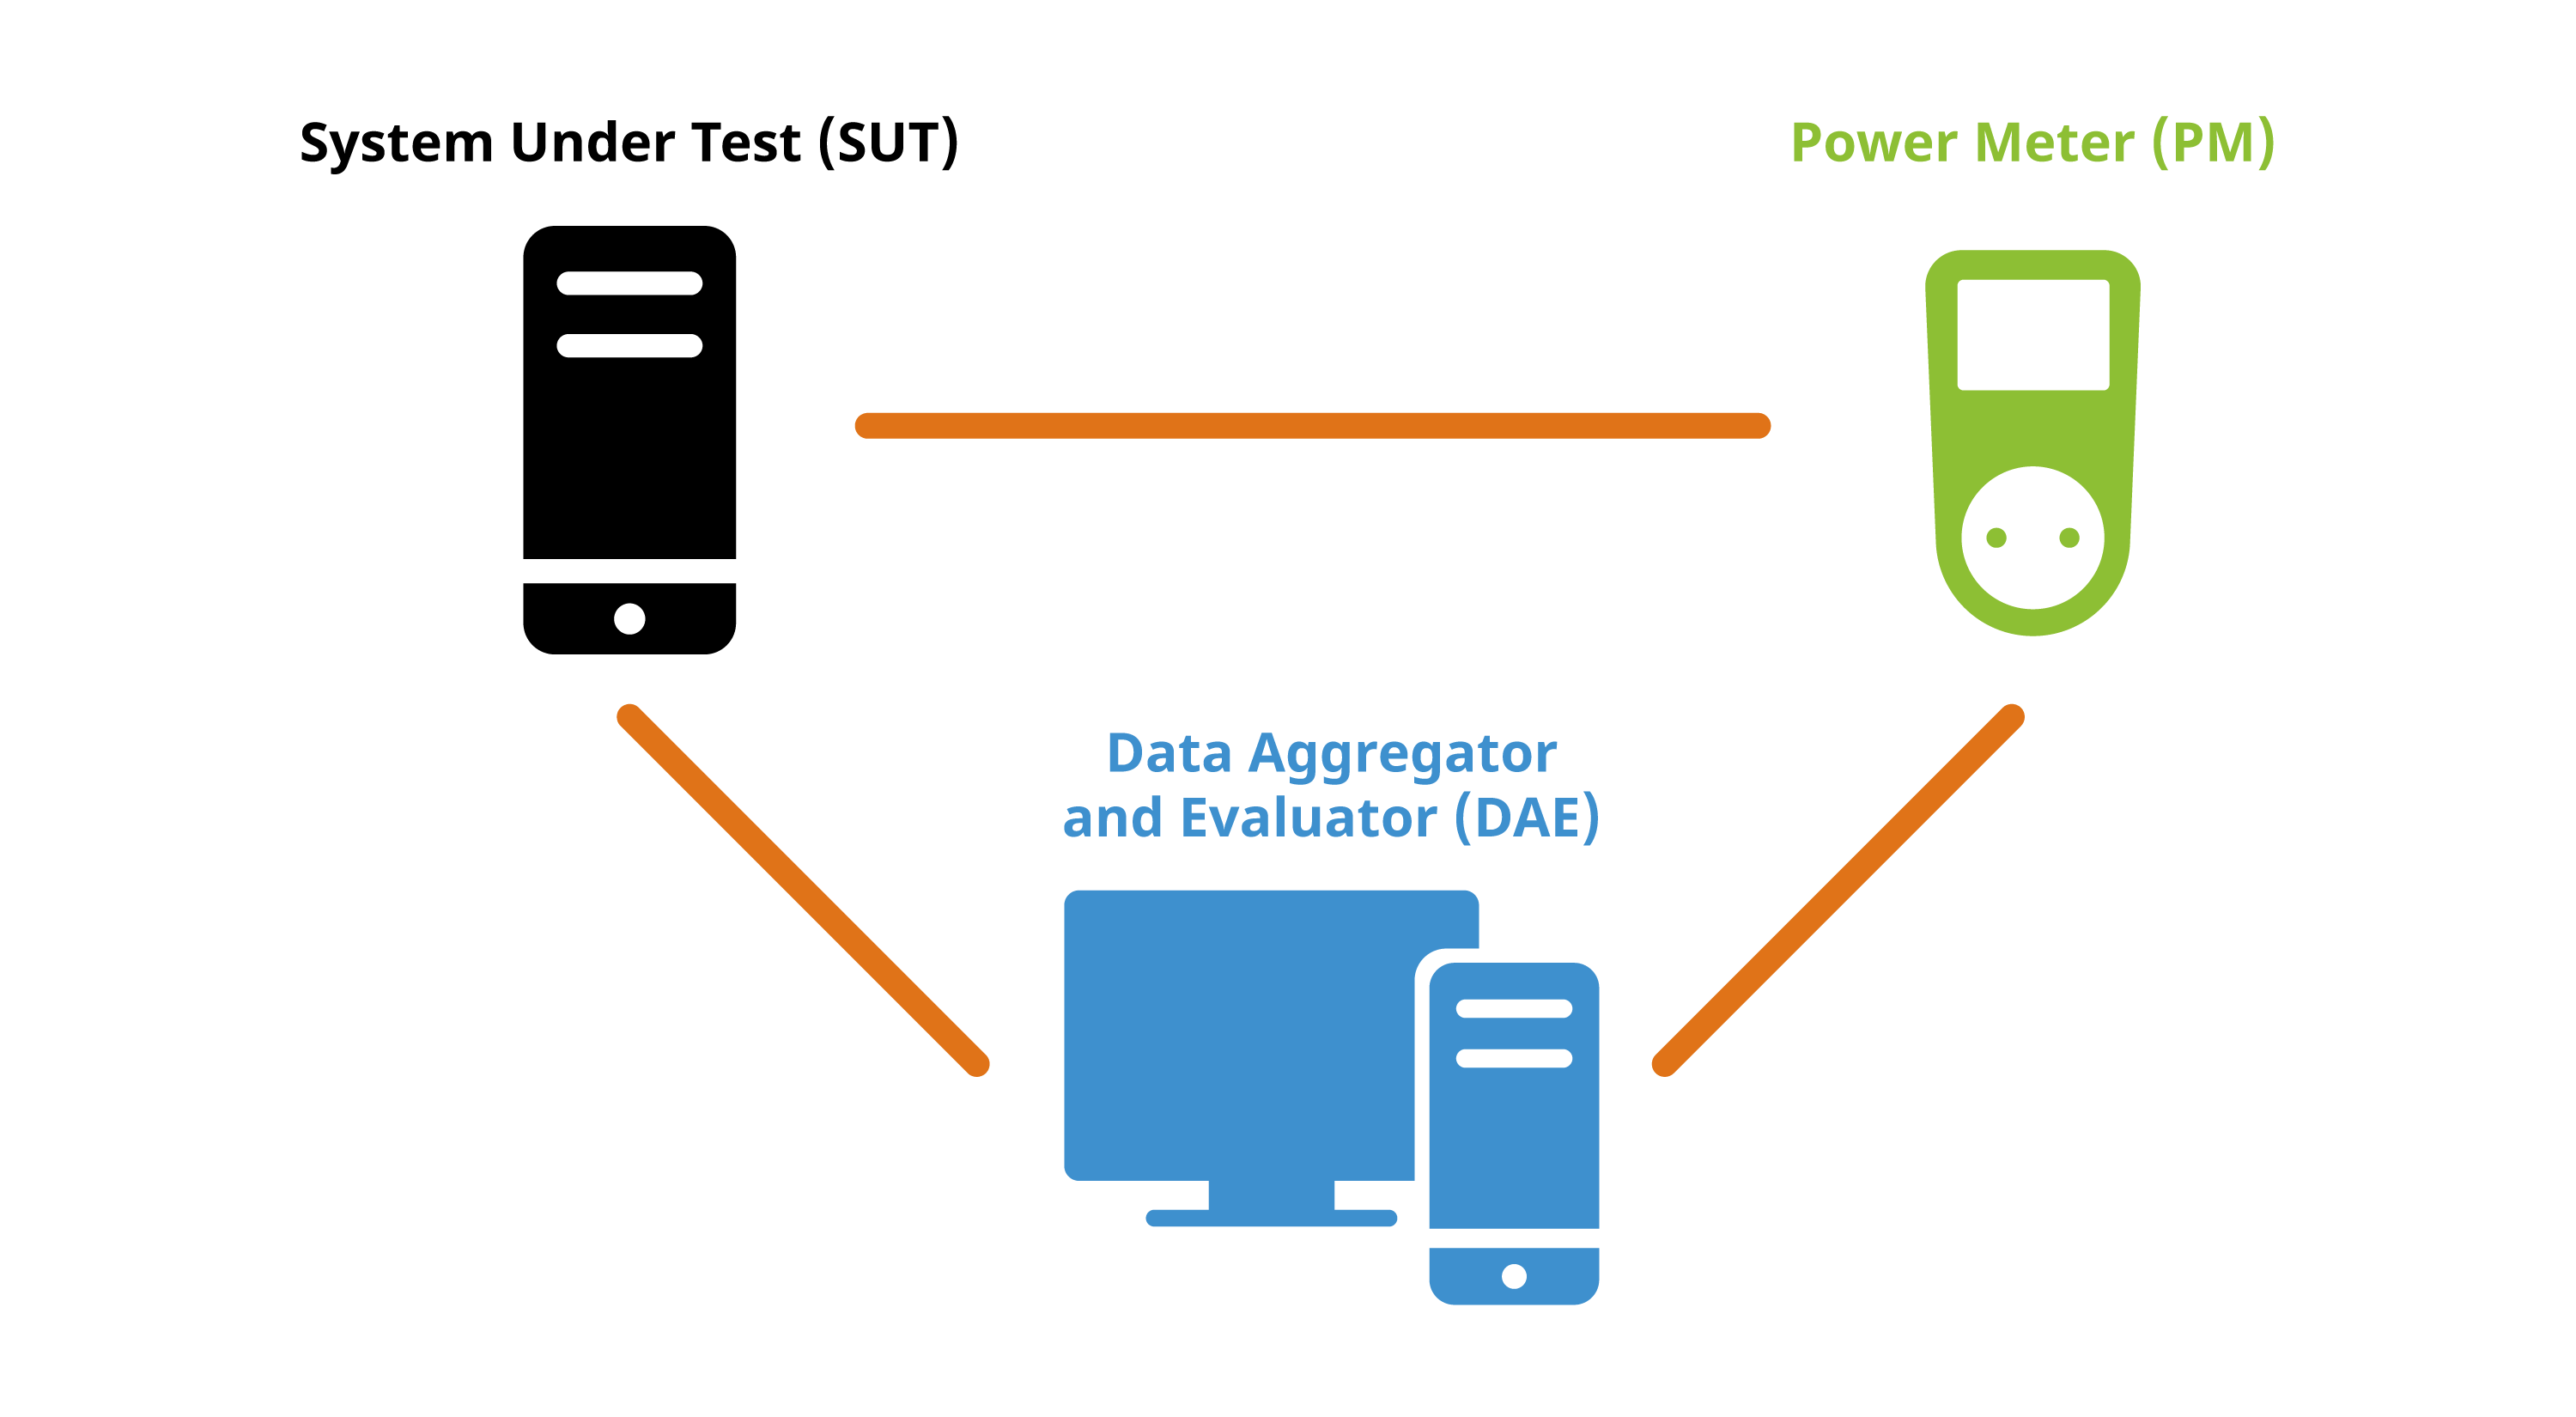 Overview of laboratory setup, including the System Under Test, the Power Meter, and the Data Aggregator and Evaluator. (Image from KDE published under a <a href="https://spdx.org/licenses/CC-BY-SA-4.0.html">CC-BY-SA-4.0</a> license. Design by Lana Lutz.)